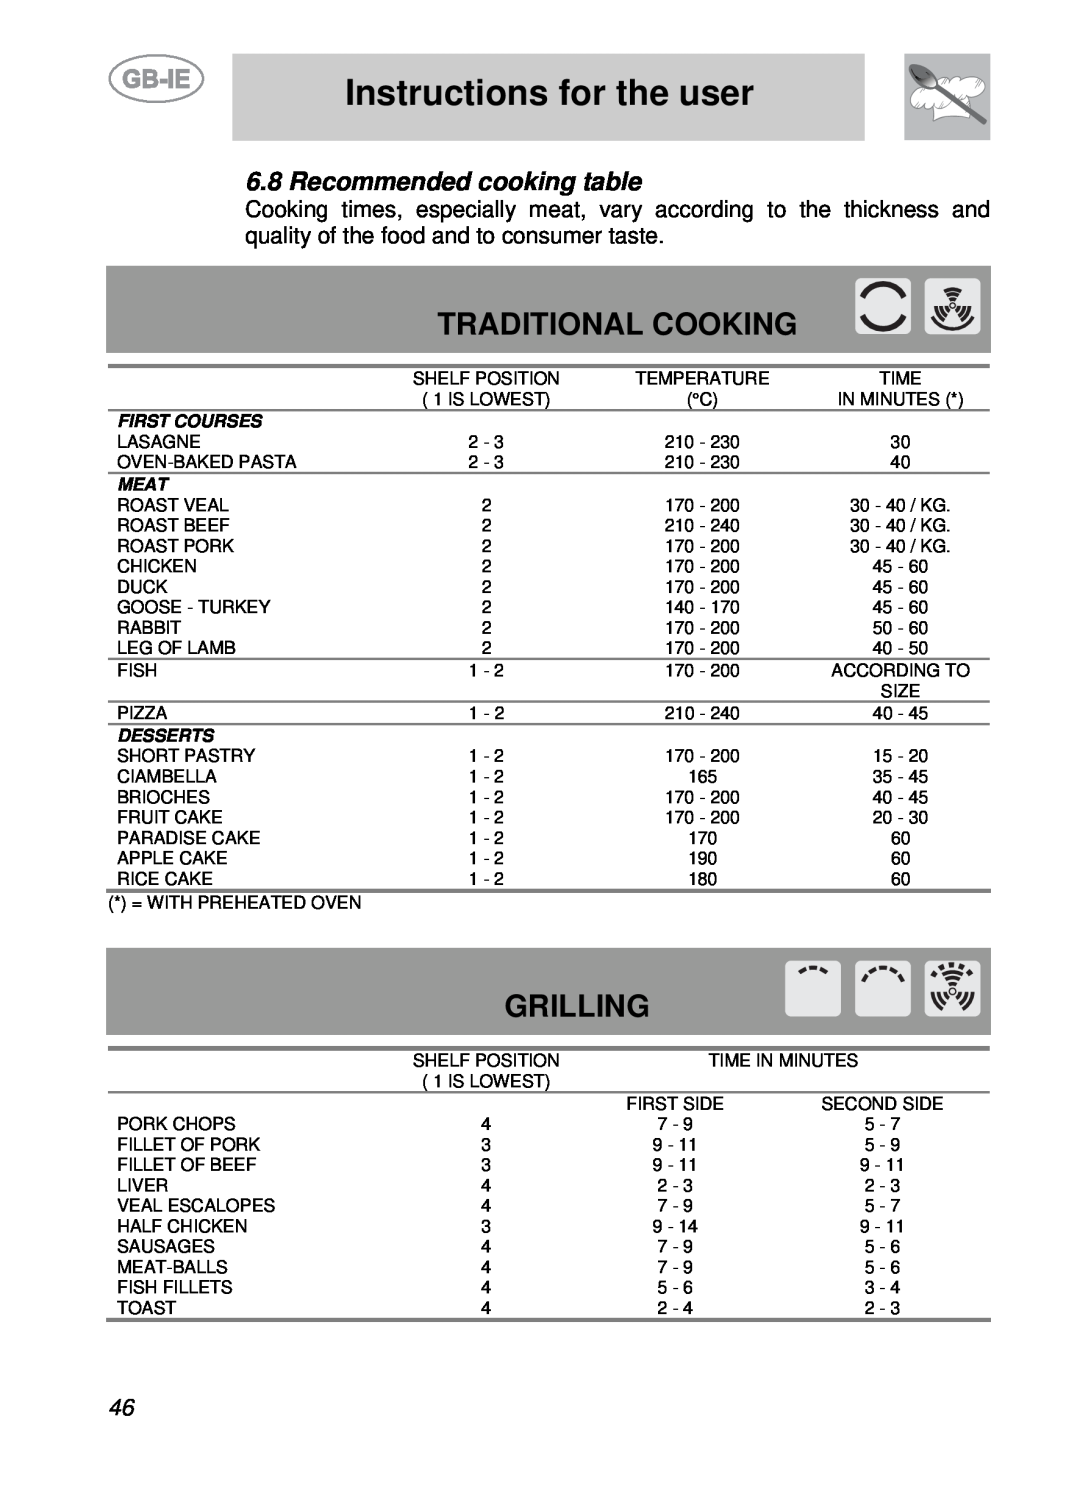 Smeg S709X-7 Traditional Cooking, Grilling, Recommended cooking table, Instructions for the user, First Courses, Meat 